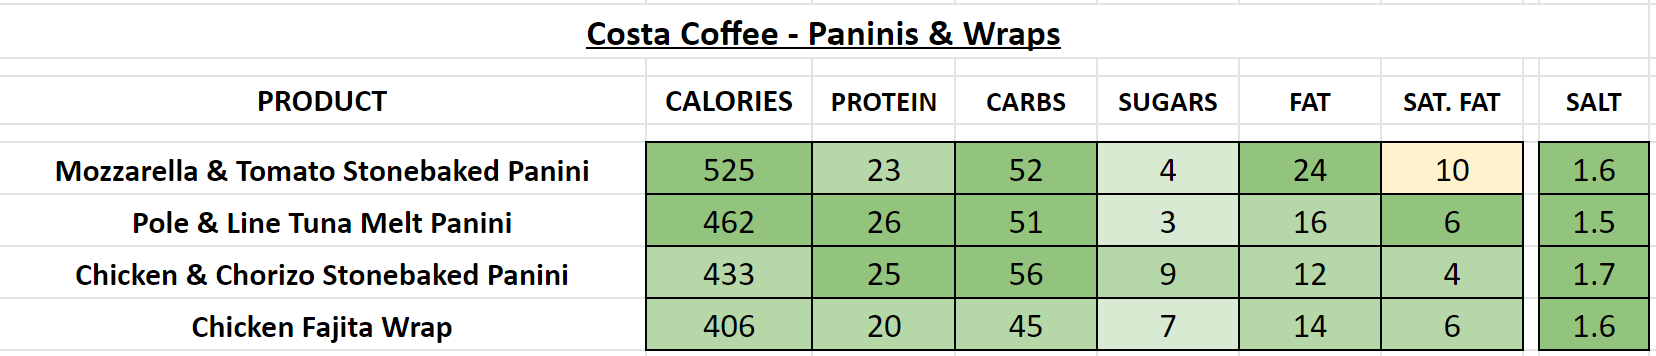 costa coffee Paninis Wraps nutritional information calories